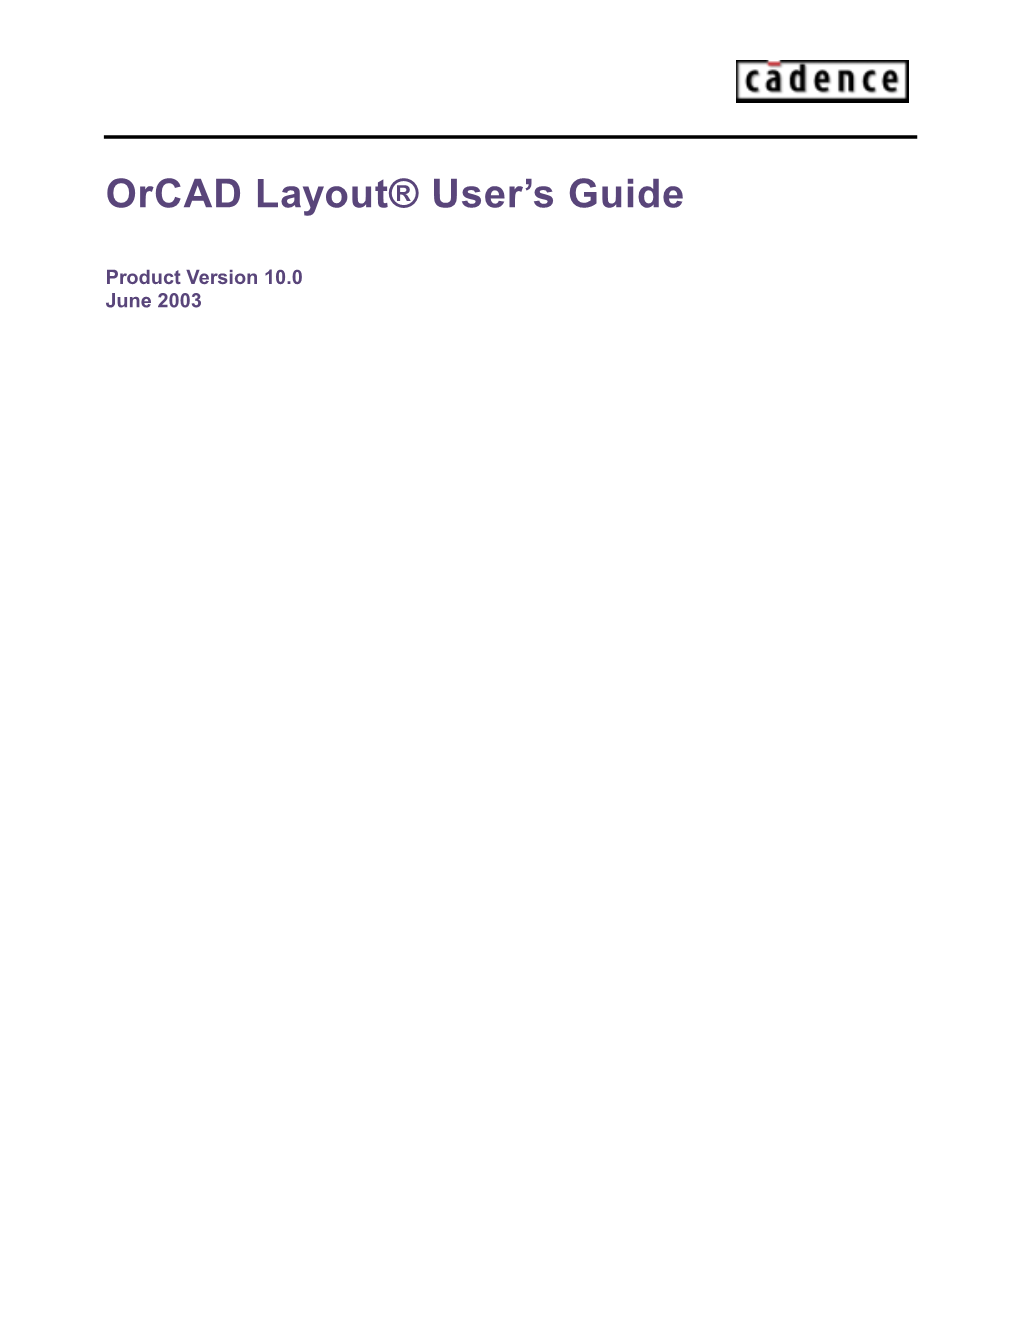 Orcad Layout® User's Guide